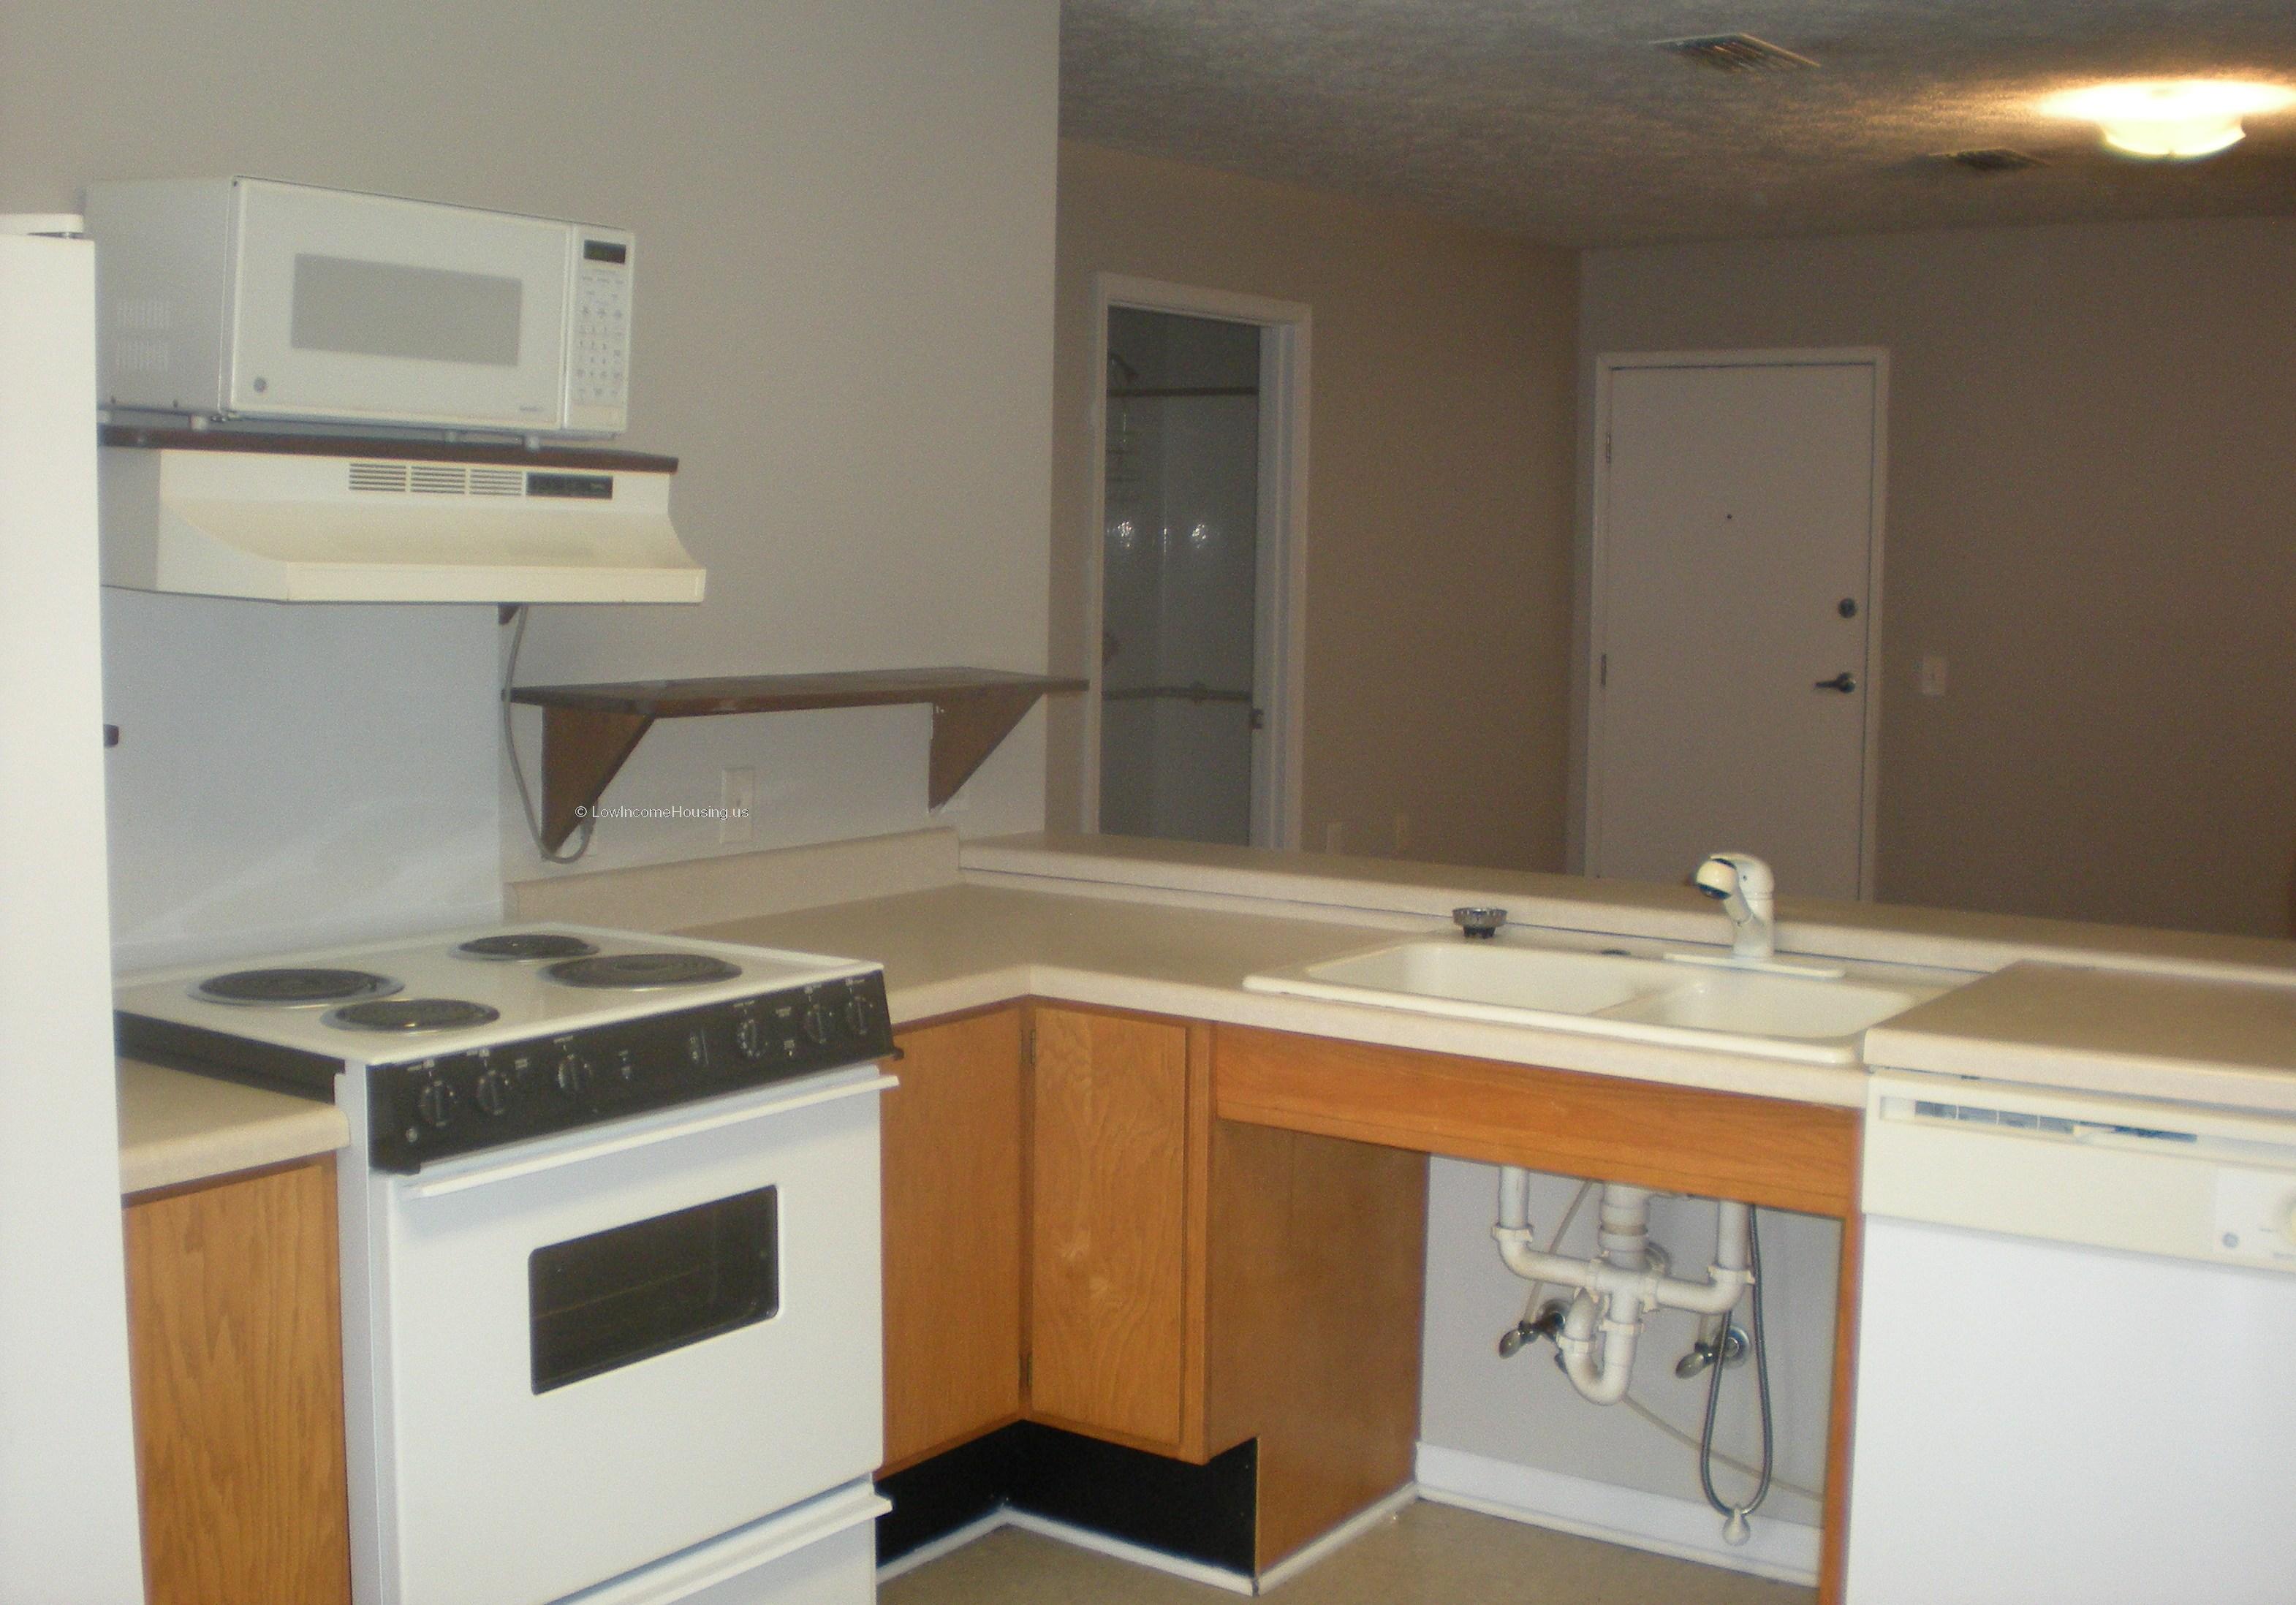 Interior view of kitchen, electric stove top, exhaust unit and twin sinks with hot and cold running water. 